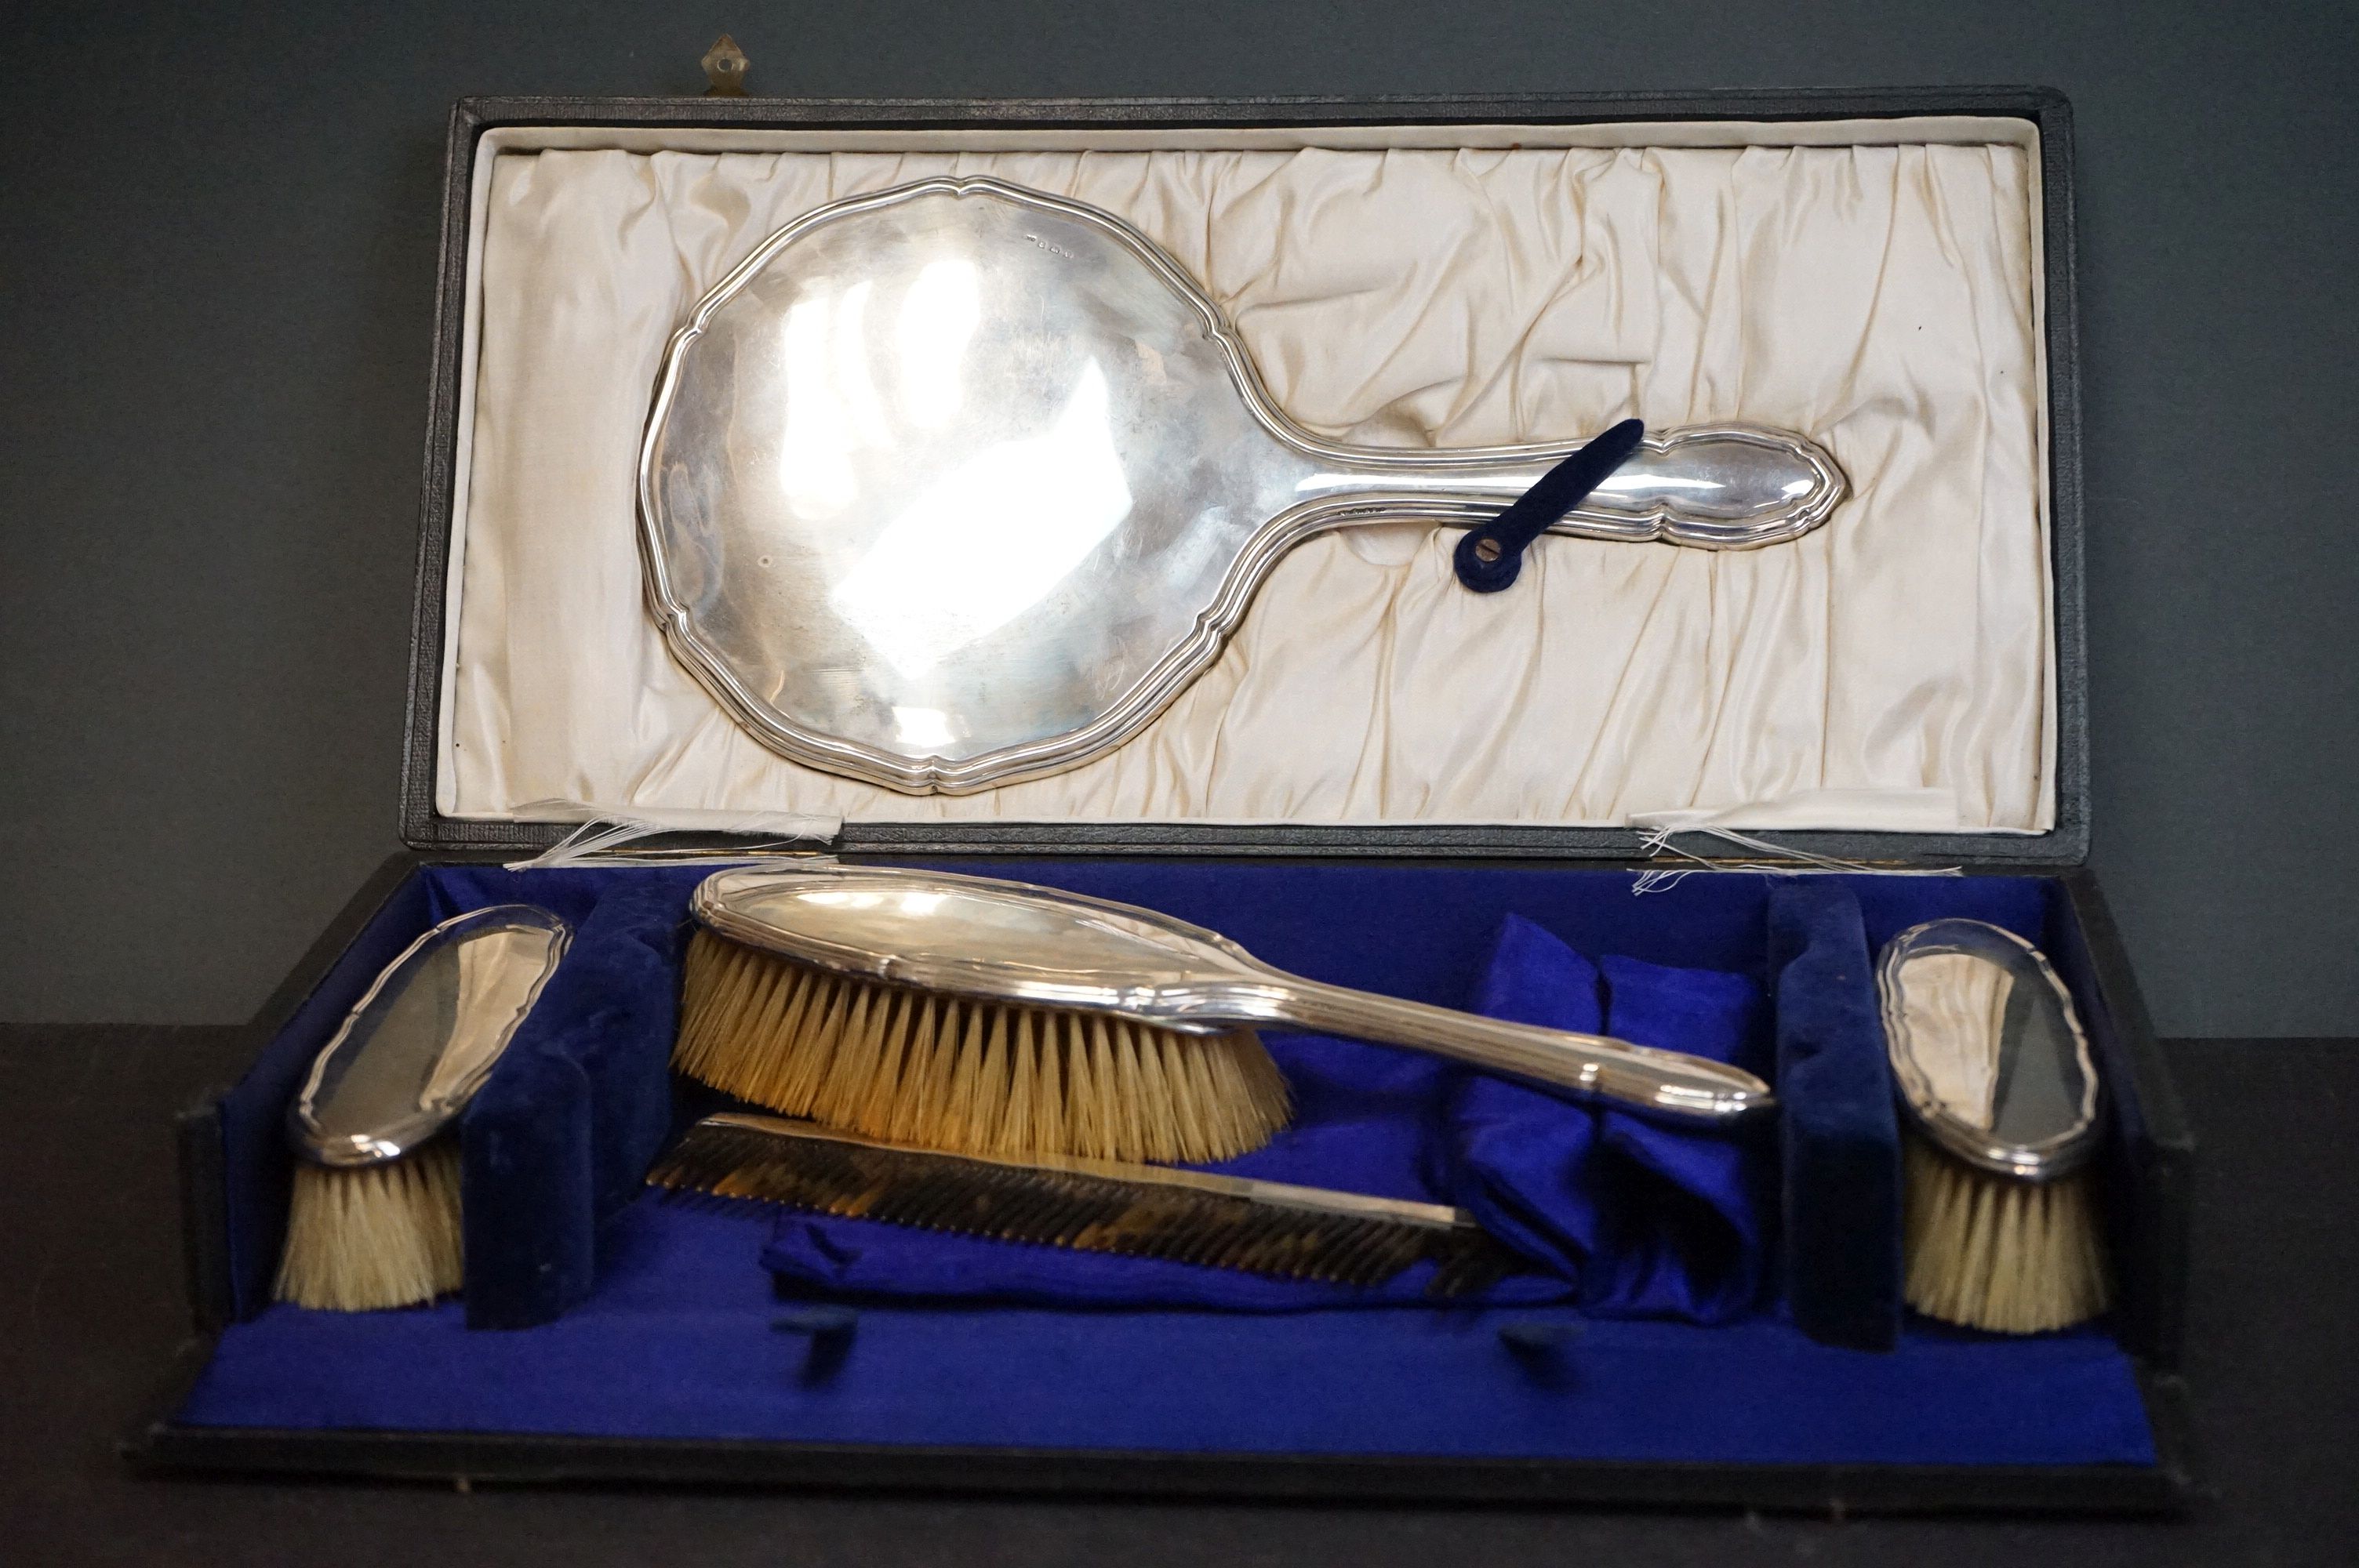 A Gorham Manufacturing Co sterling silver vanity brush & mirror set in original fitted box